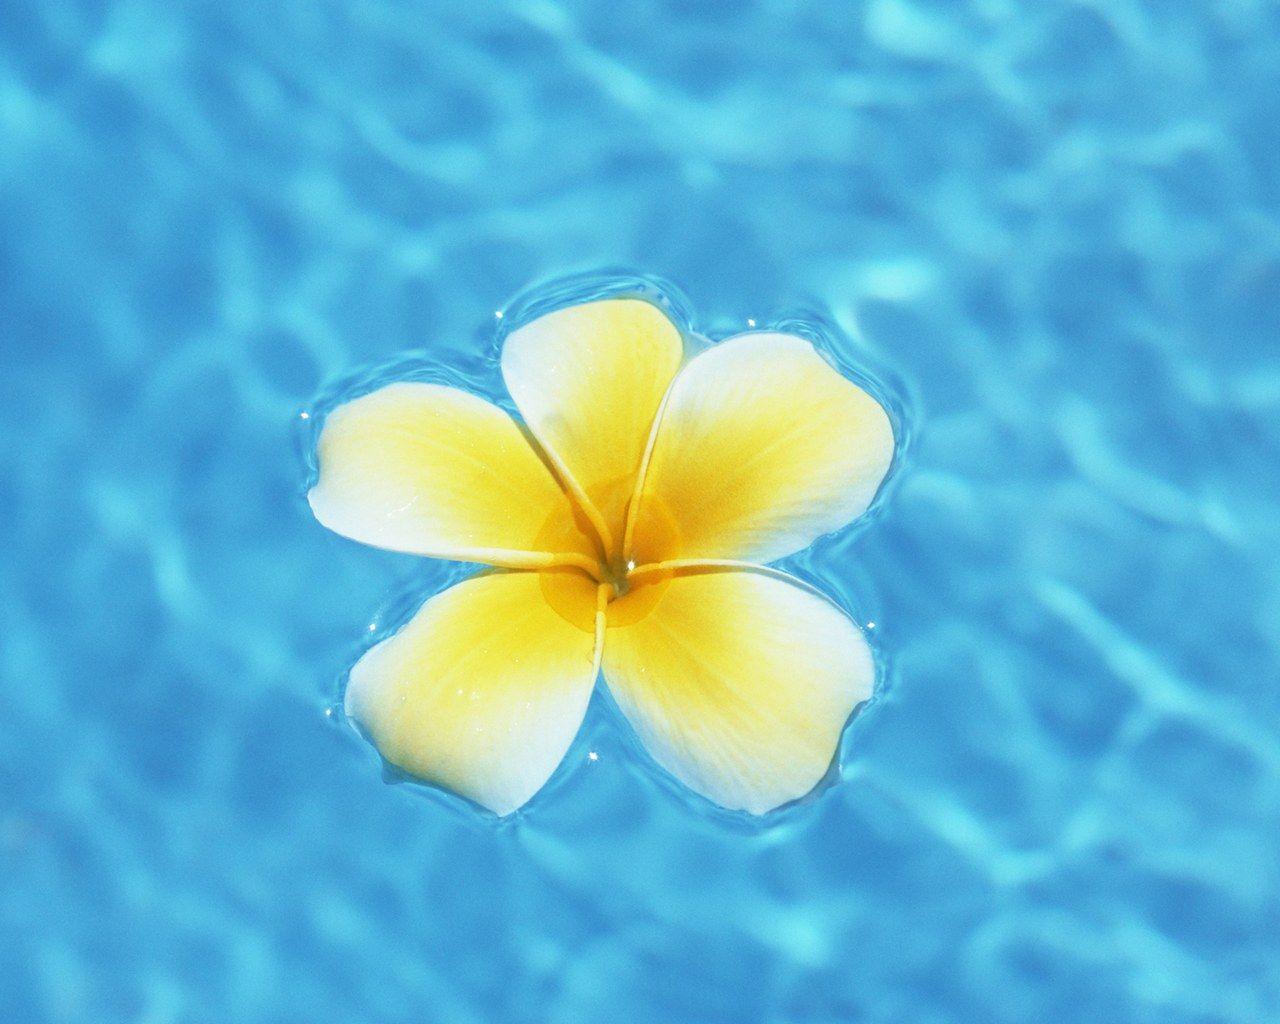 Hawaiian Flowers On The Beach Wallpapers Image & Pictures